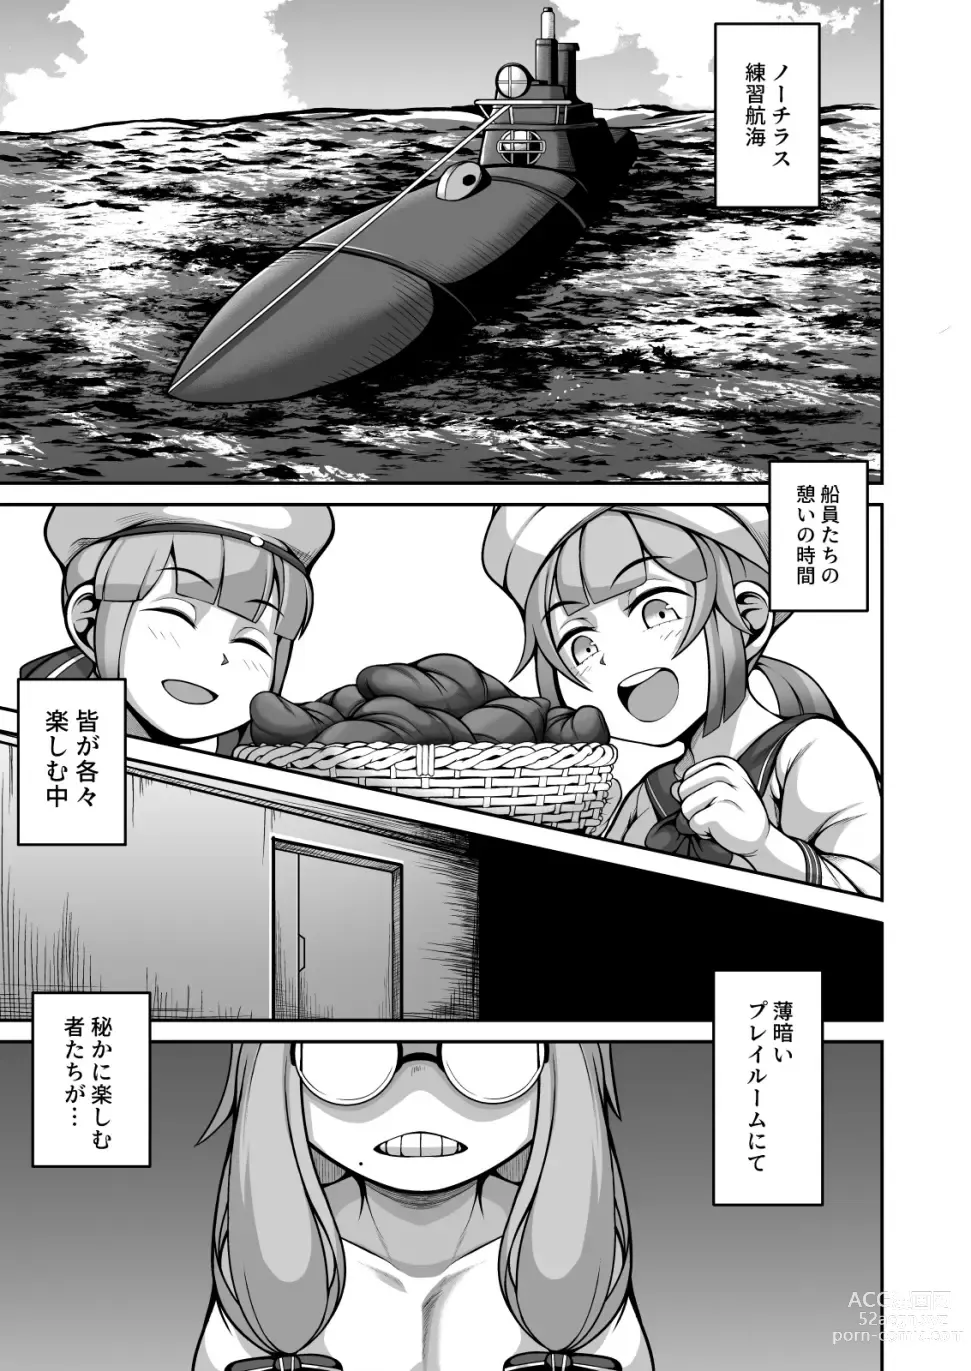 Page 5 of doujinshi 20,000 miles under the shit